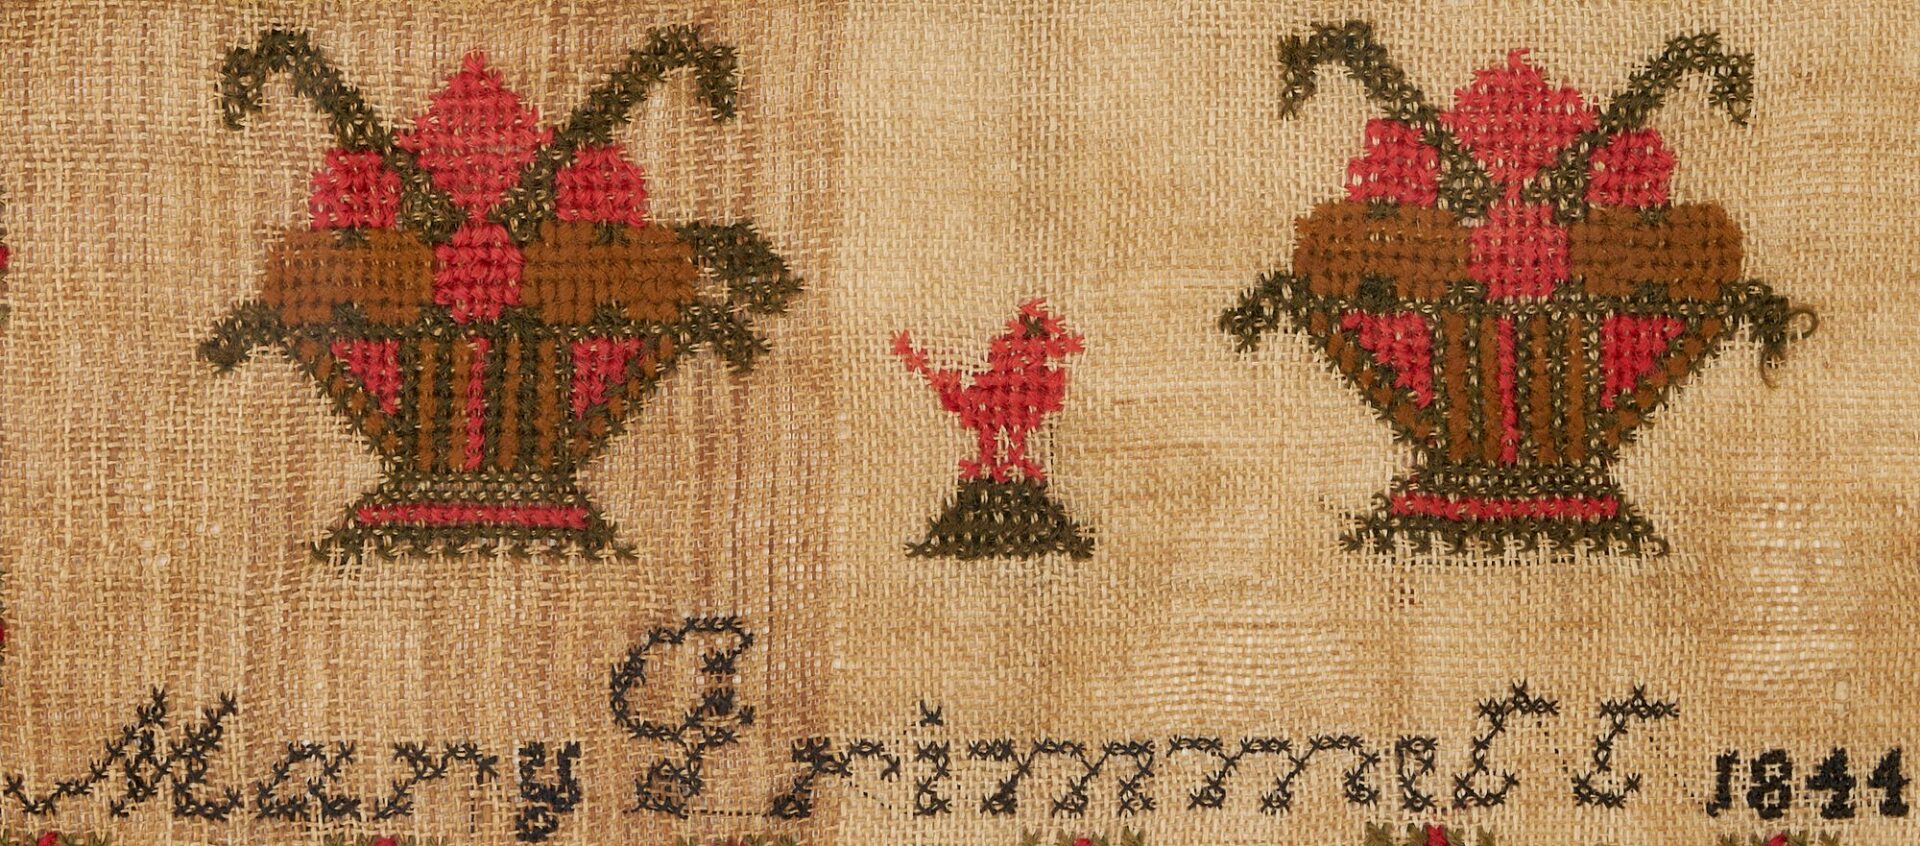 Lot 223: Middle Tennessee 1844 Sampler, Mary Grimmet